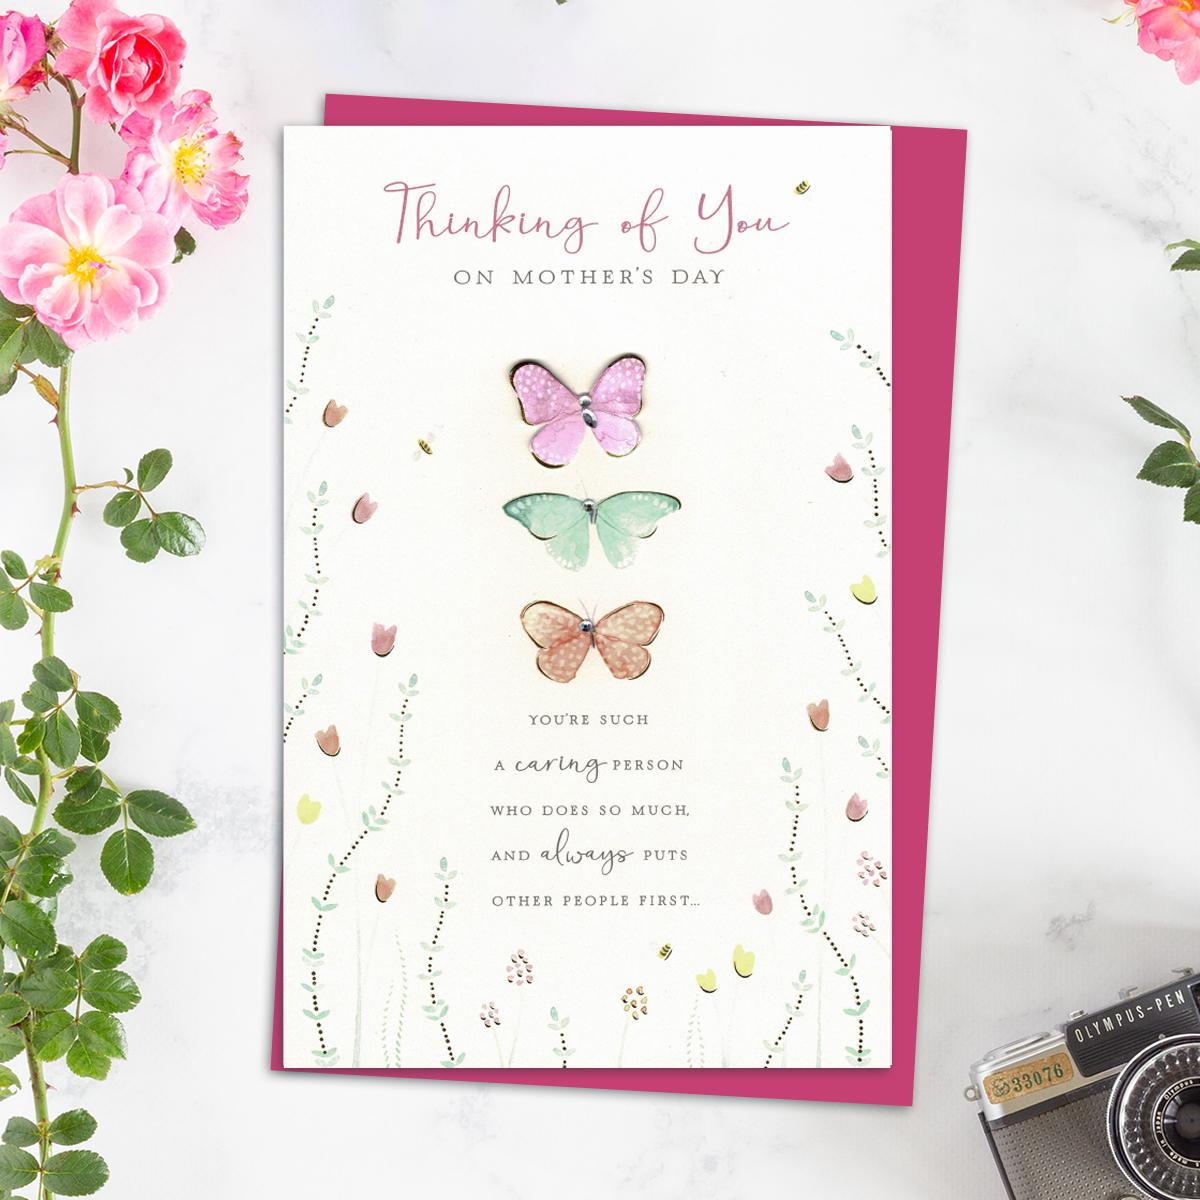 Thinking Of You Mother's Day Design Alongside Its Magenta Envelope